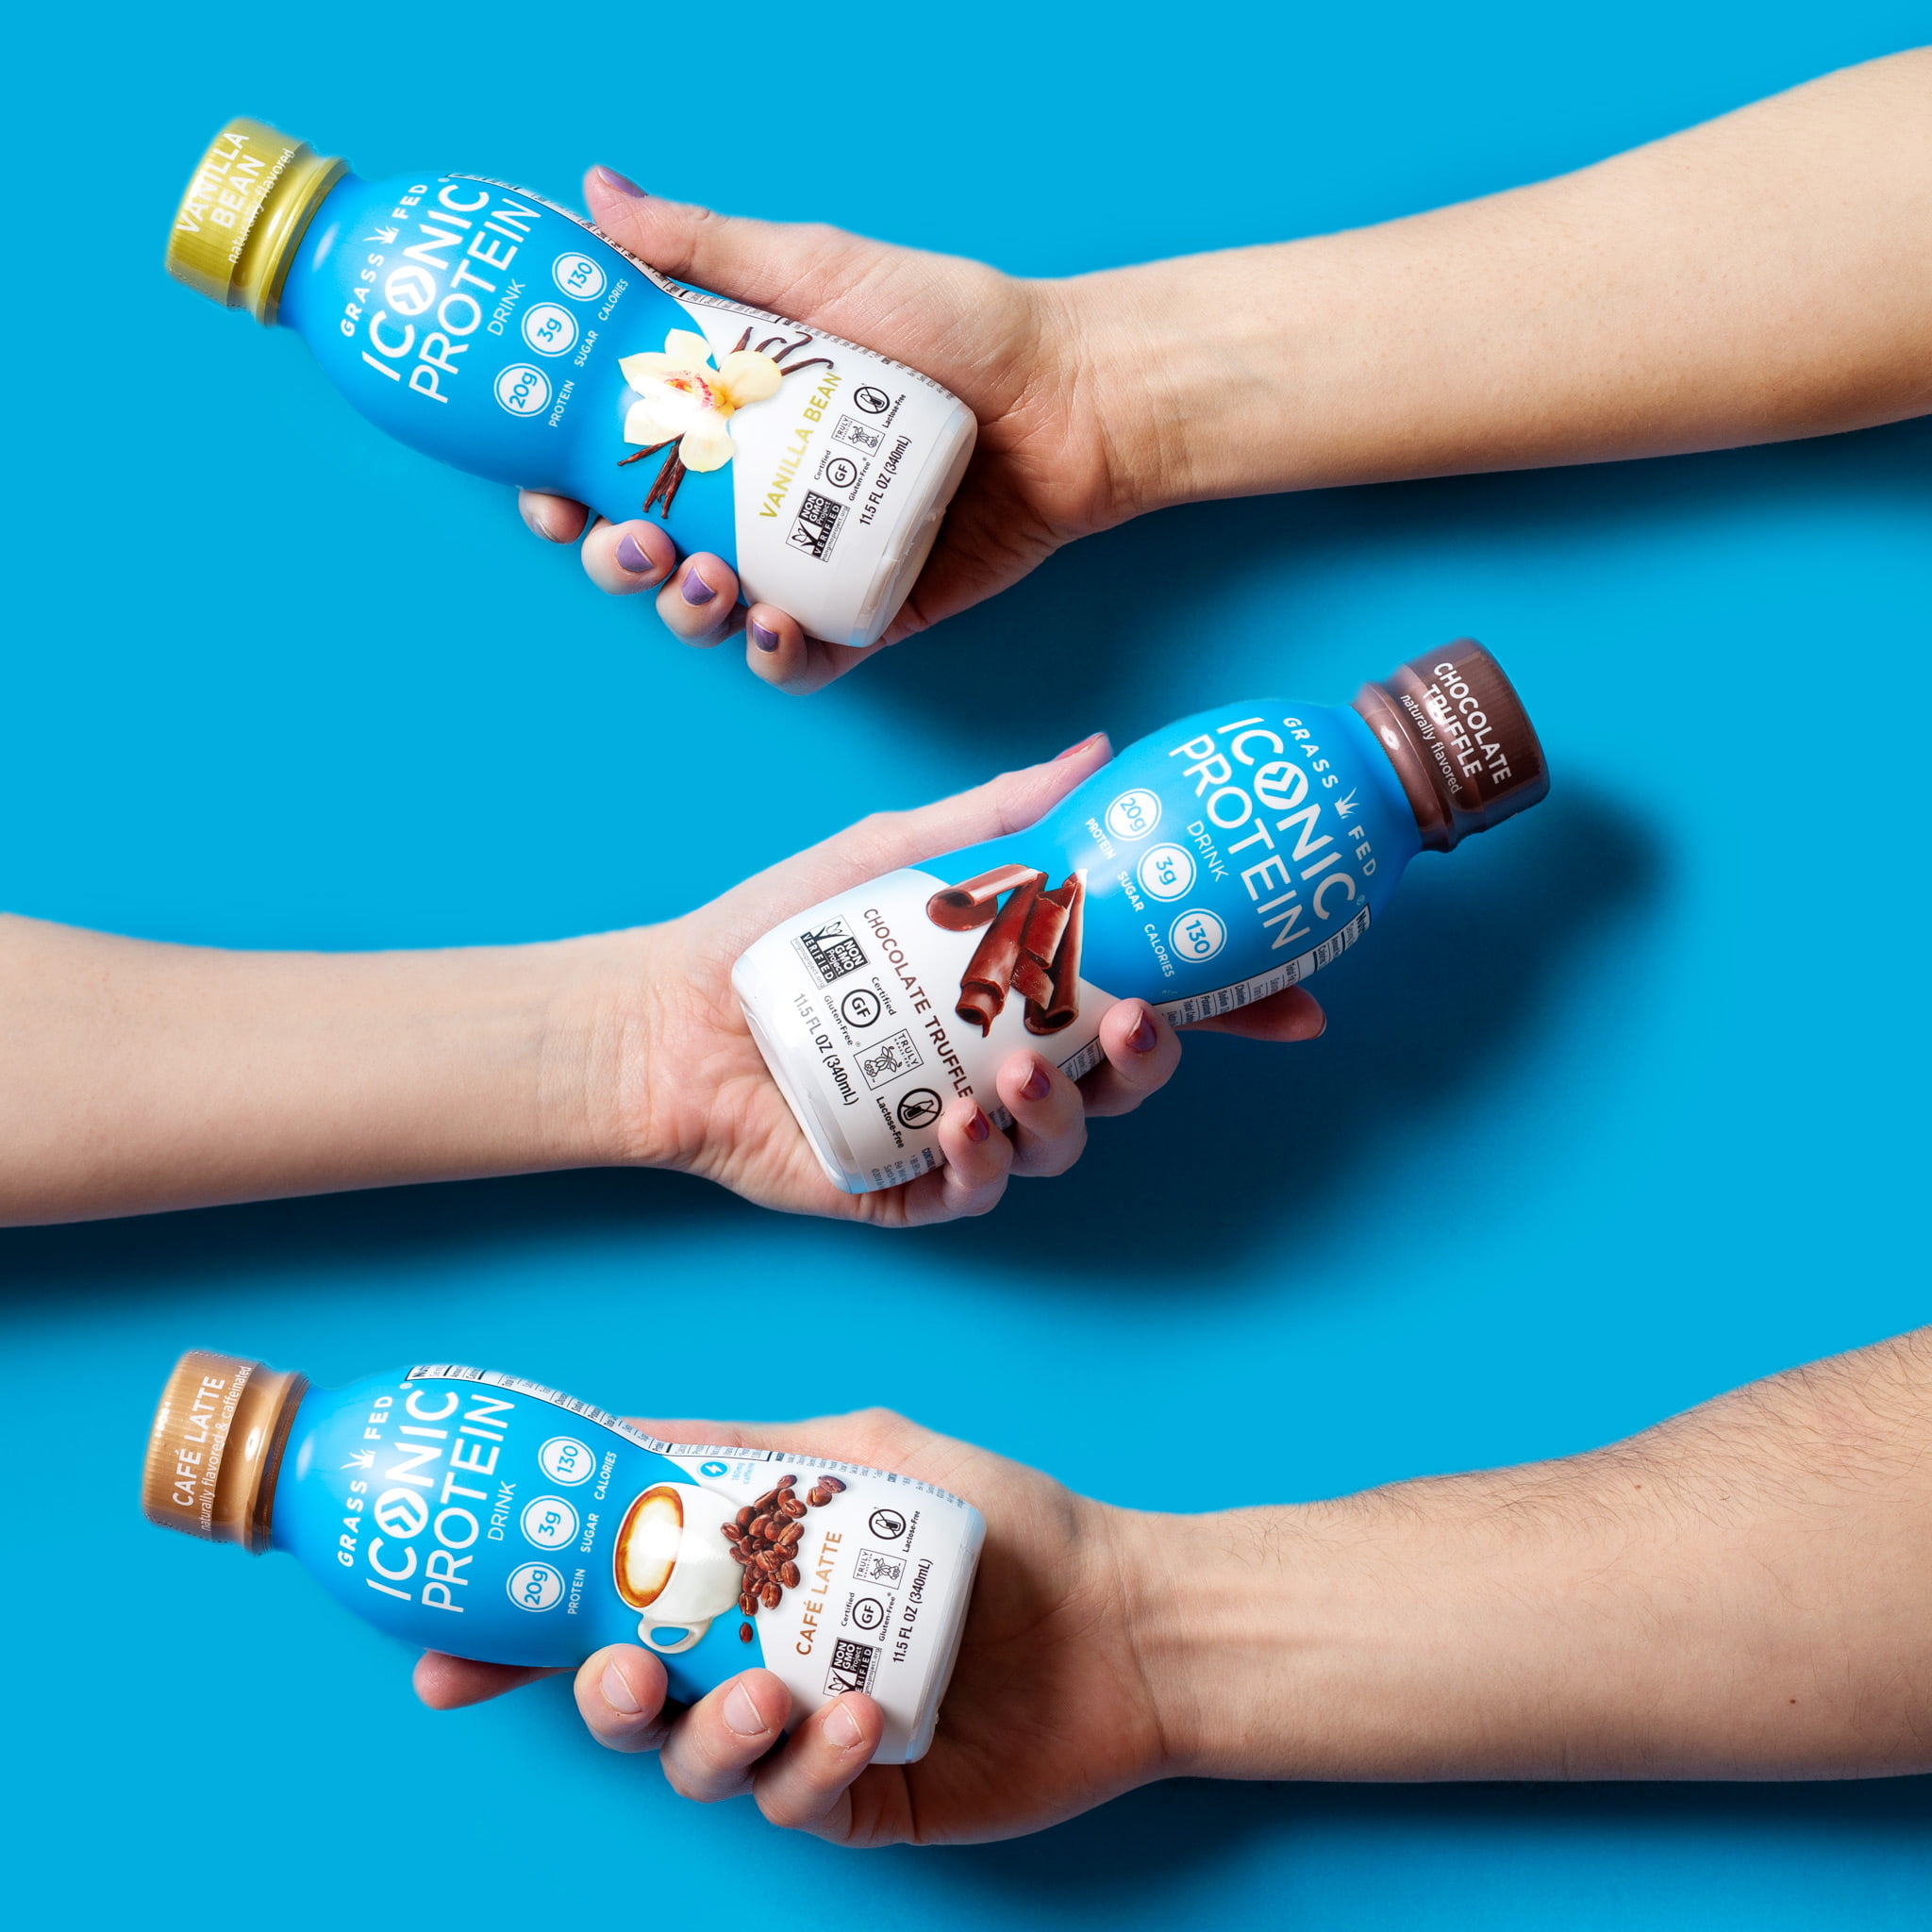 ICONIC protein beverages tout new packaging